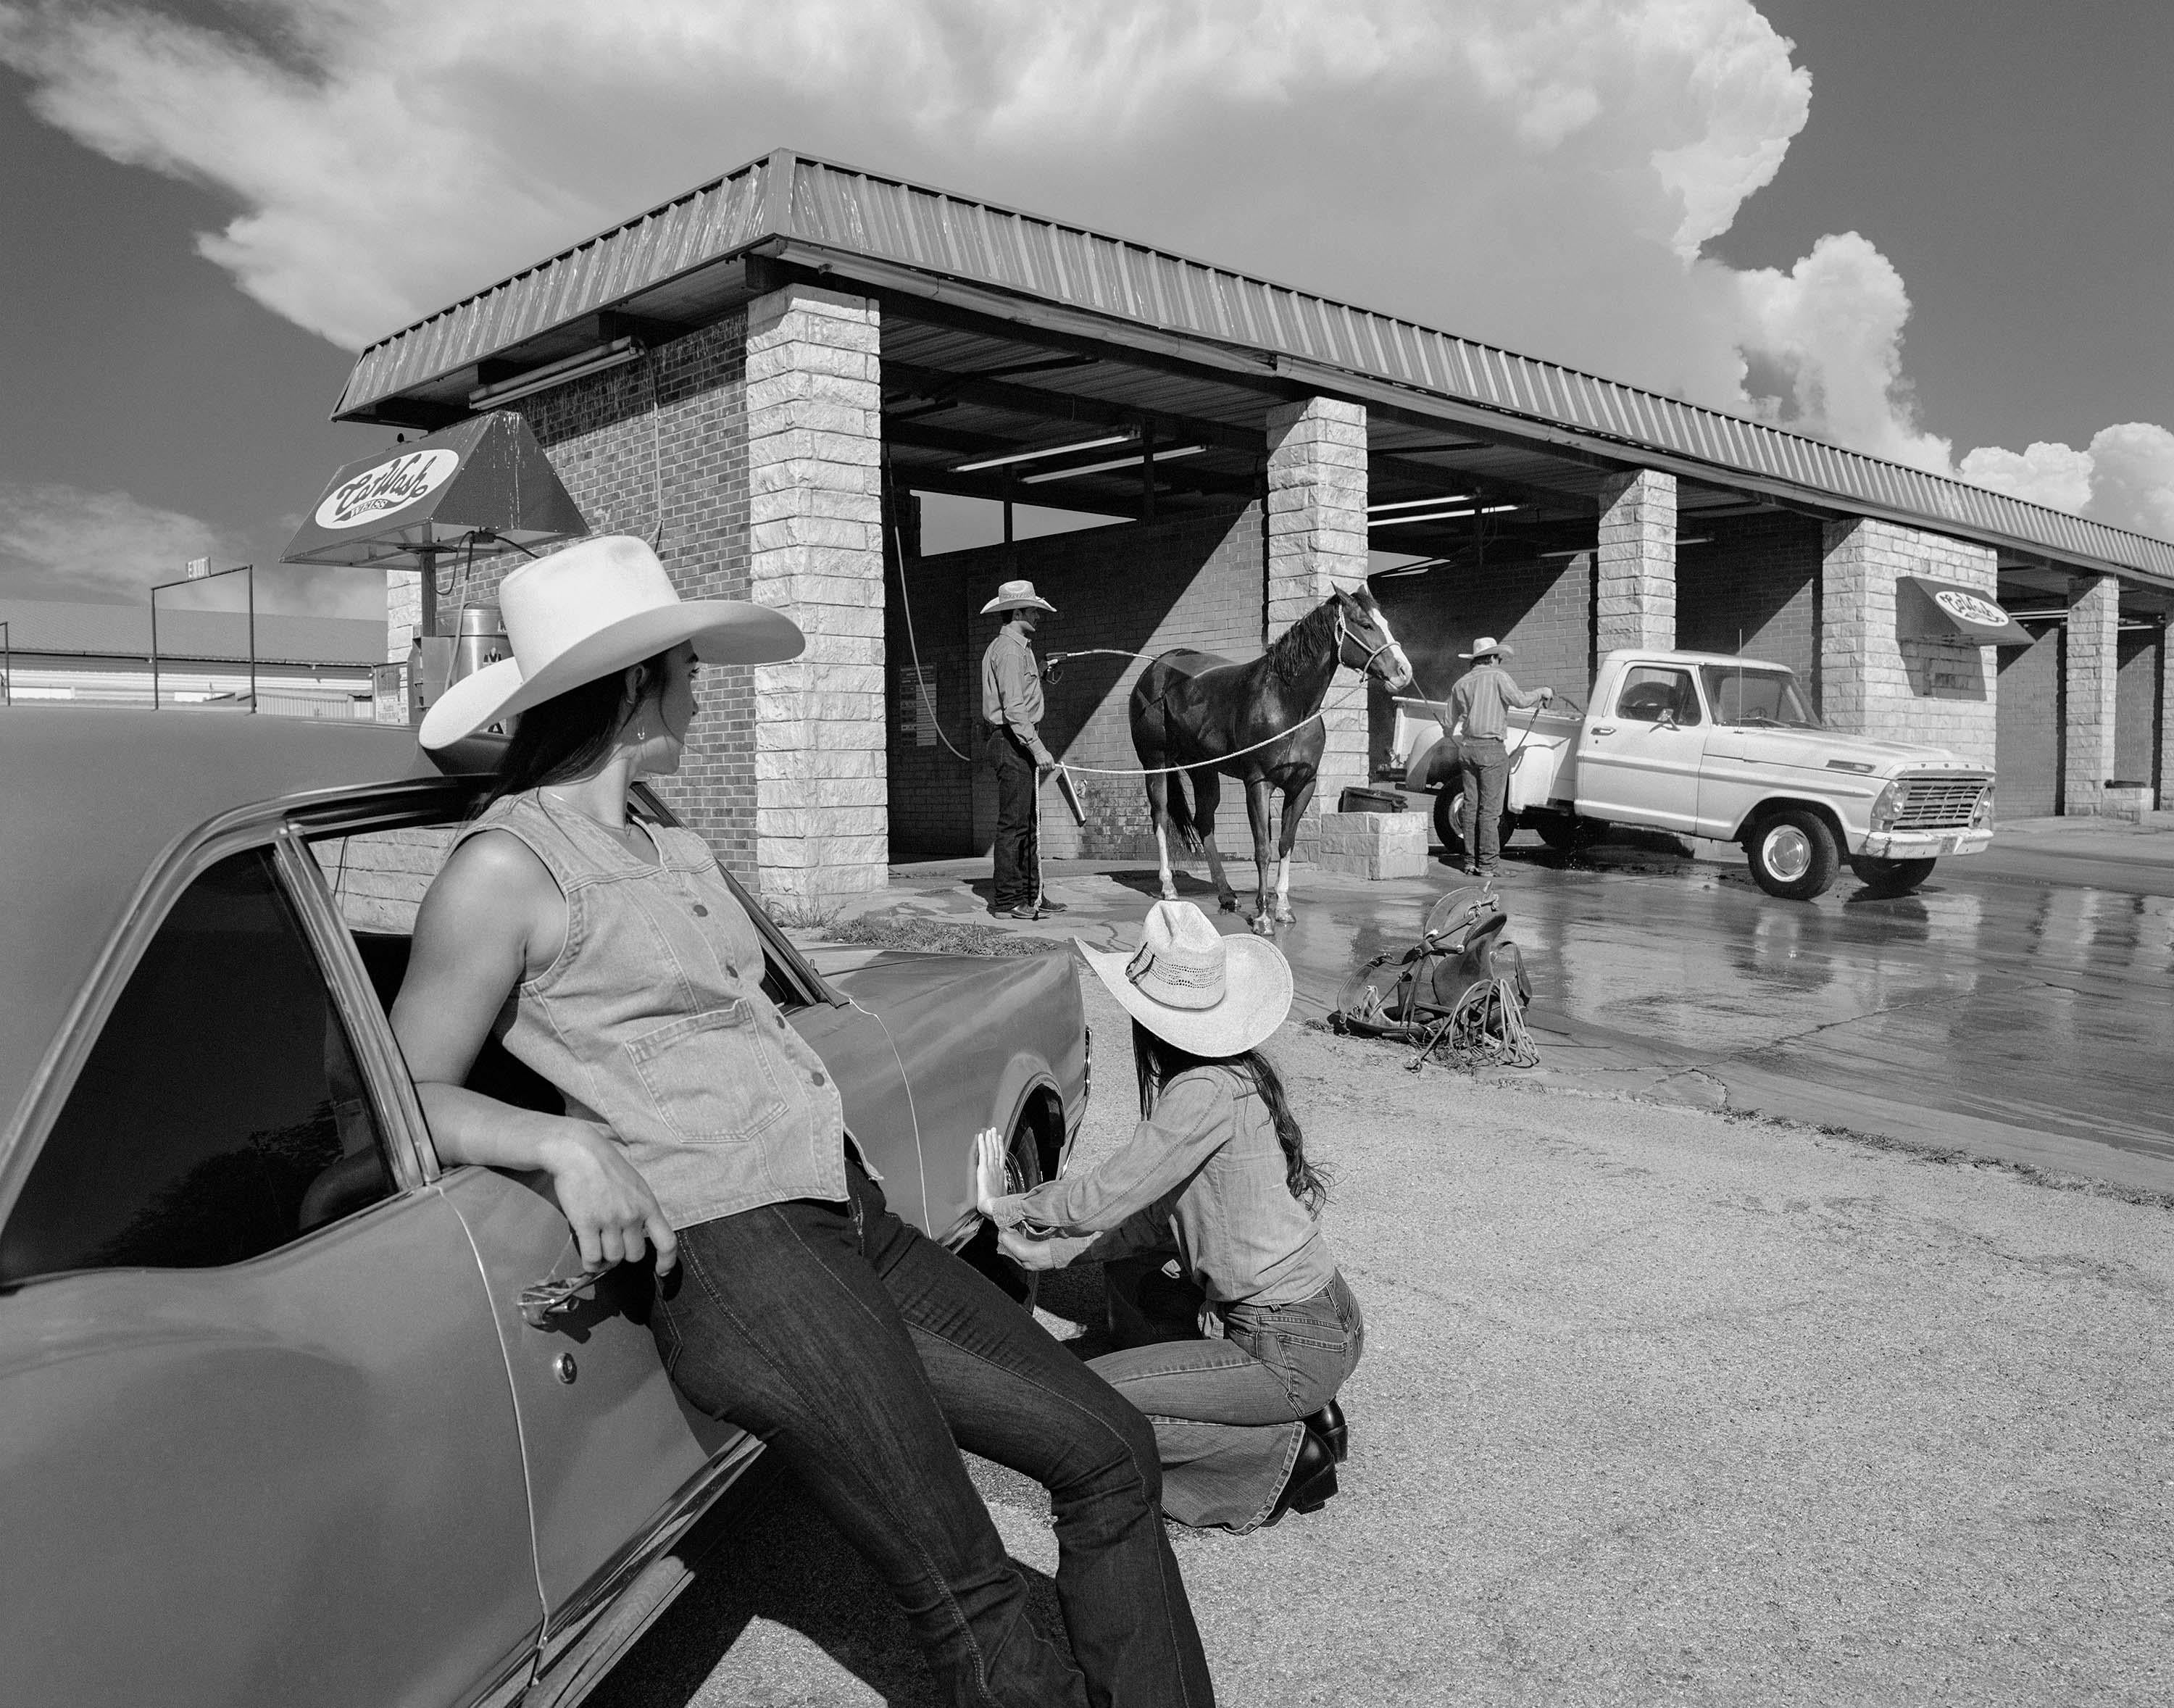 Beau Simmons Black and White Photograph - Carwash 78' 2/10